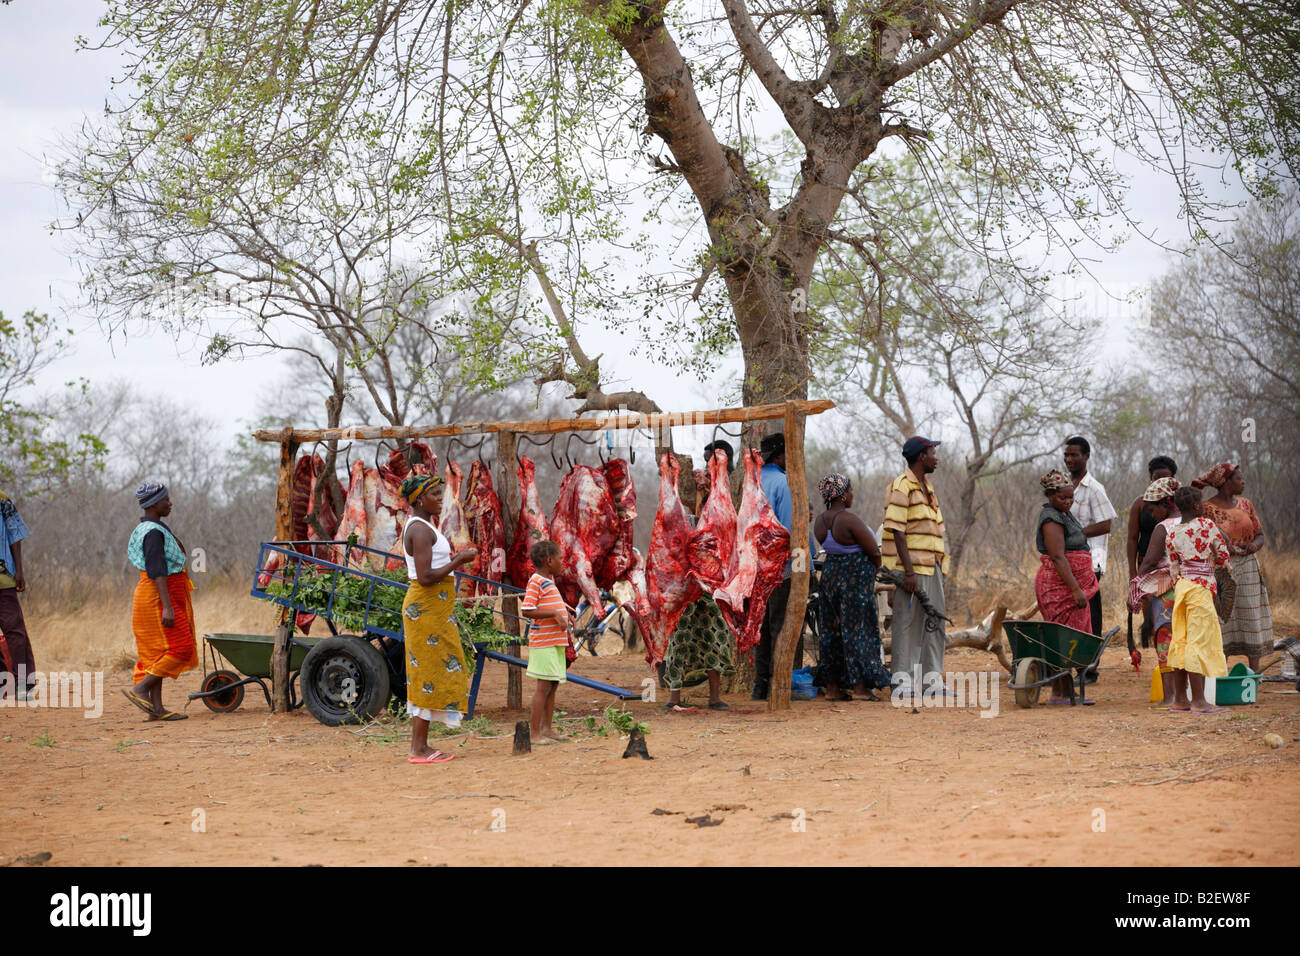 An outdoor butchery on the outskirts of Mapai showing slaughtered carcasses hanging on meat hooks beneath a tree Stock Photo